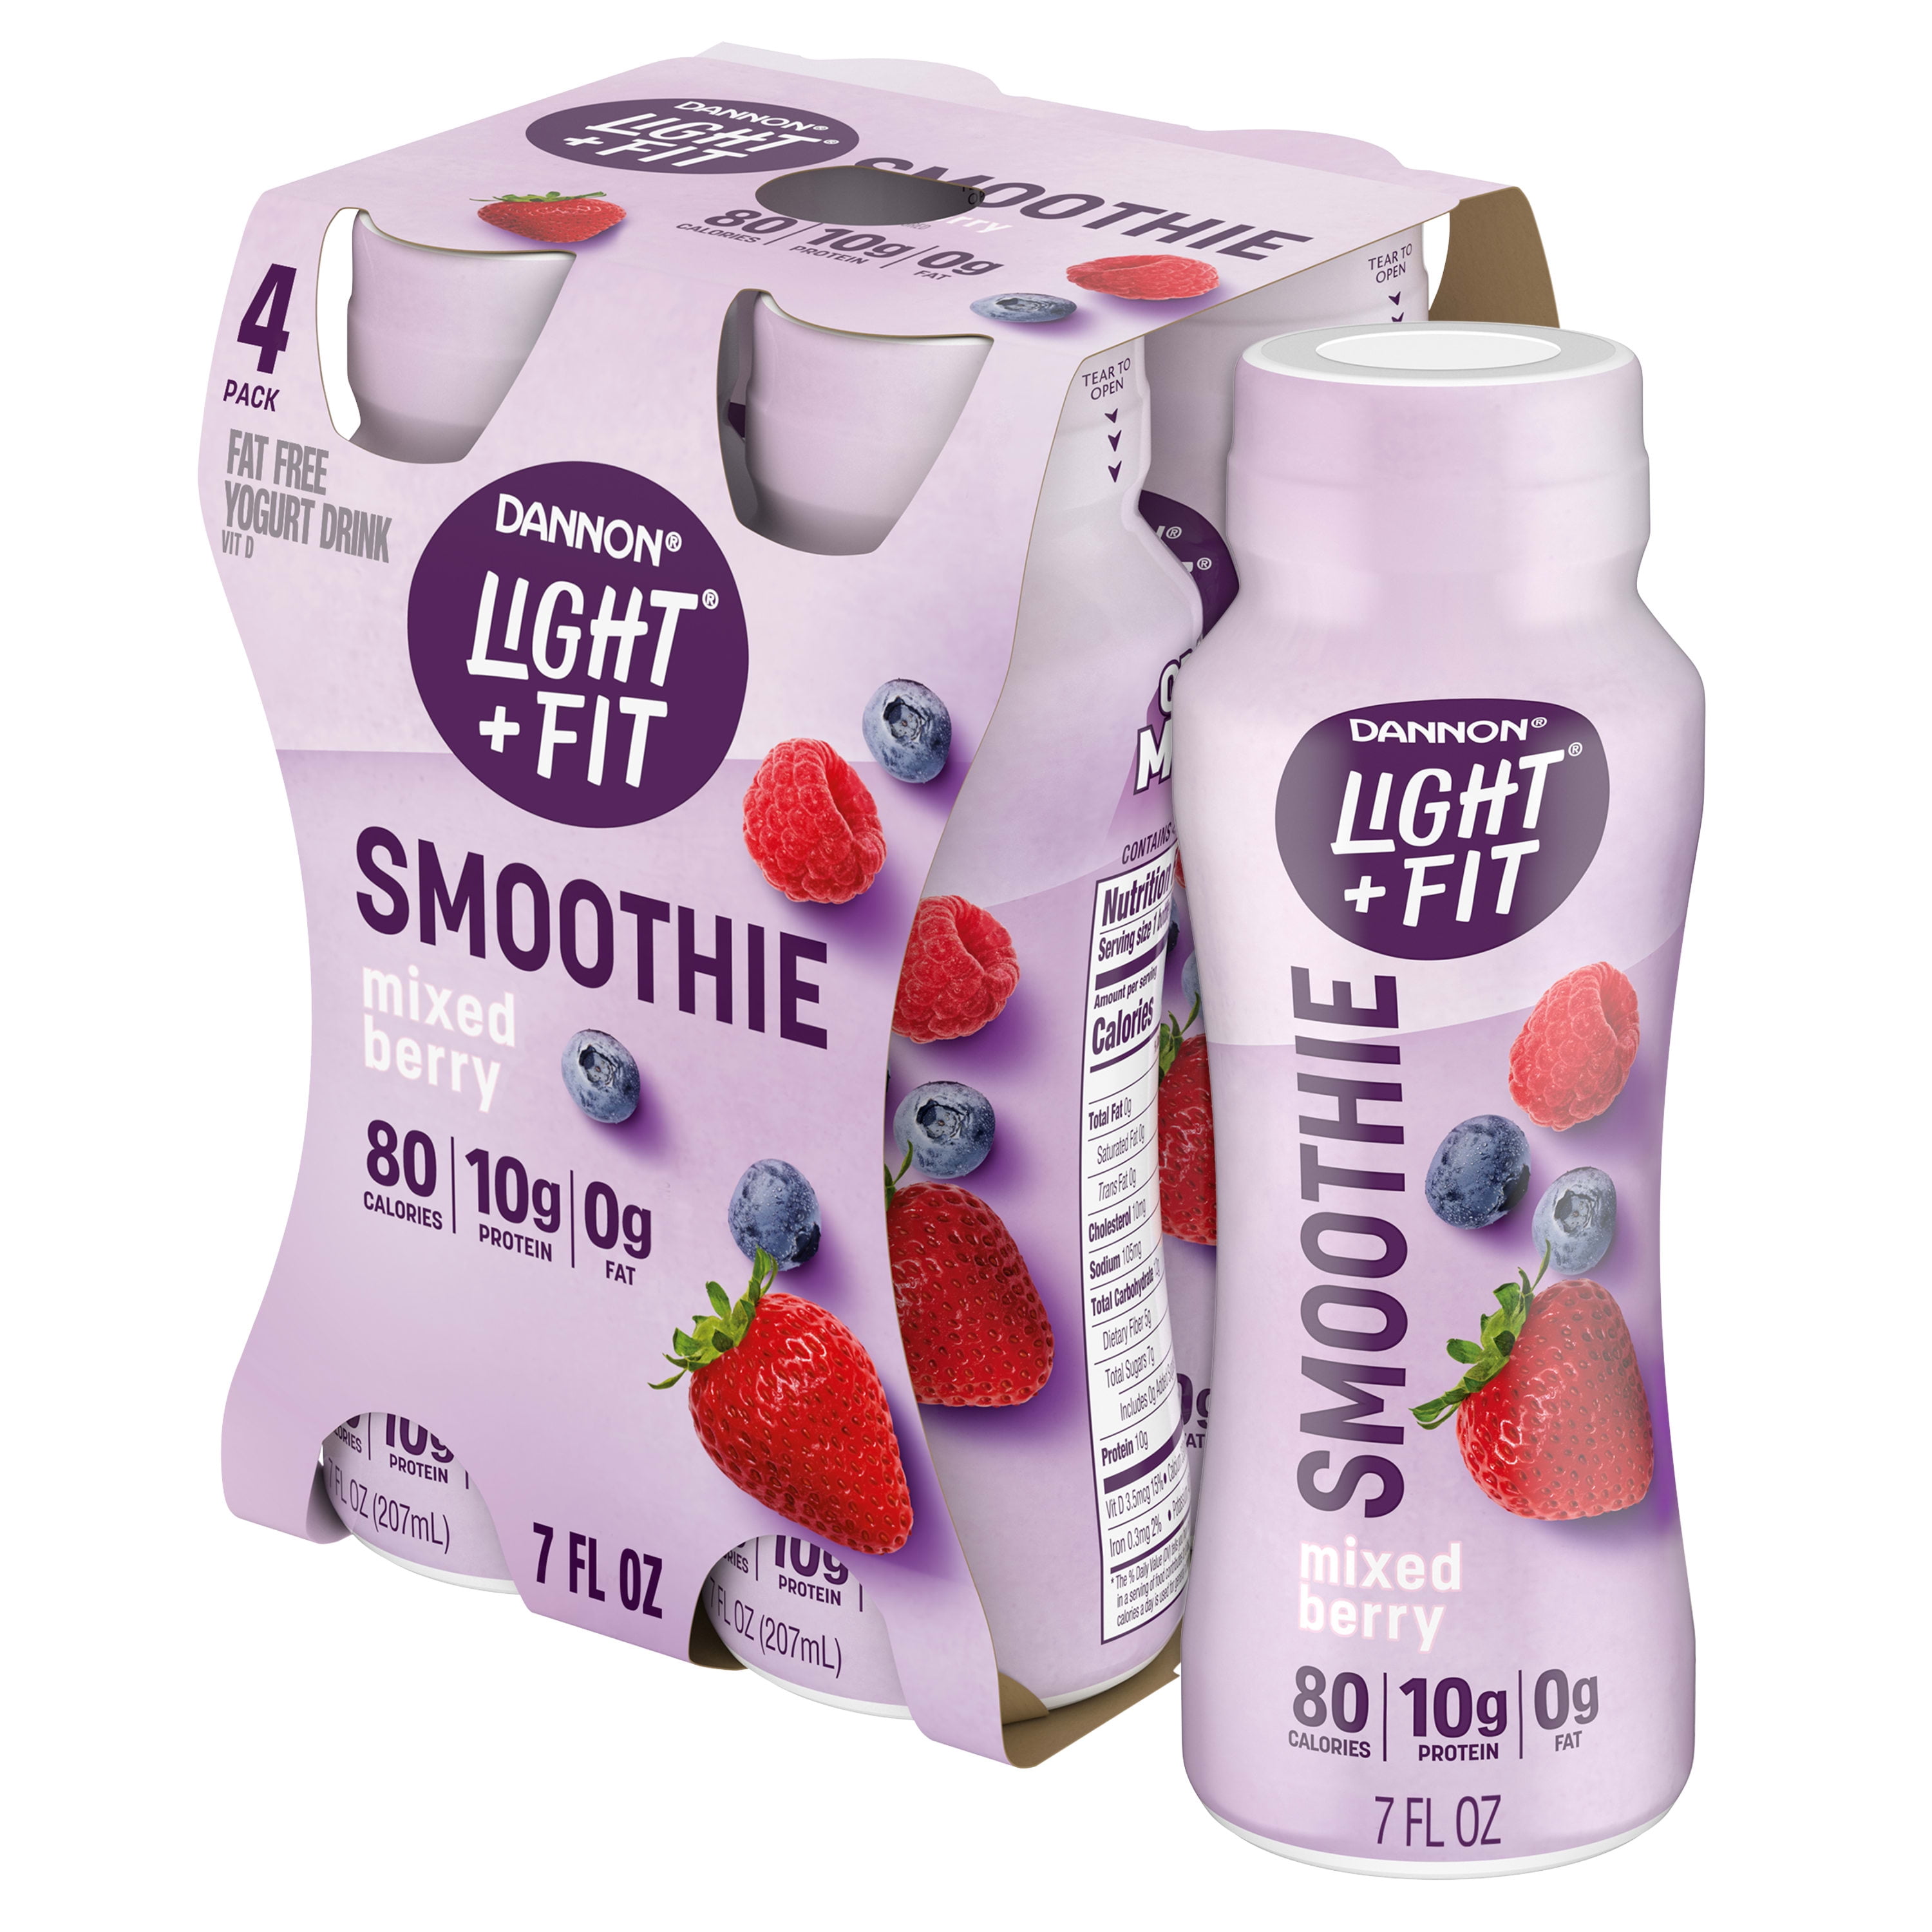 Dannon Light Fit Mixed Berry Fat Free